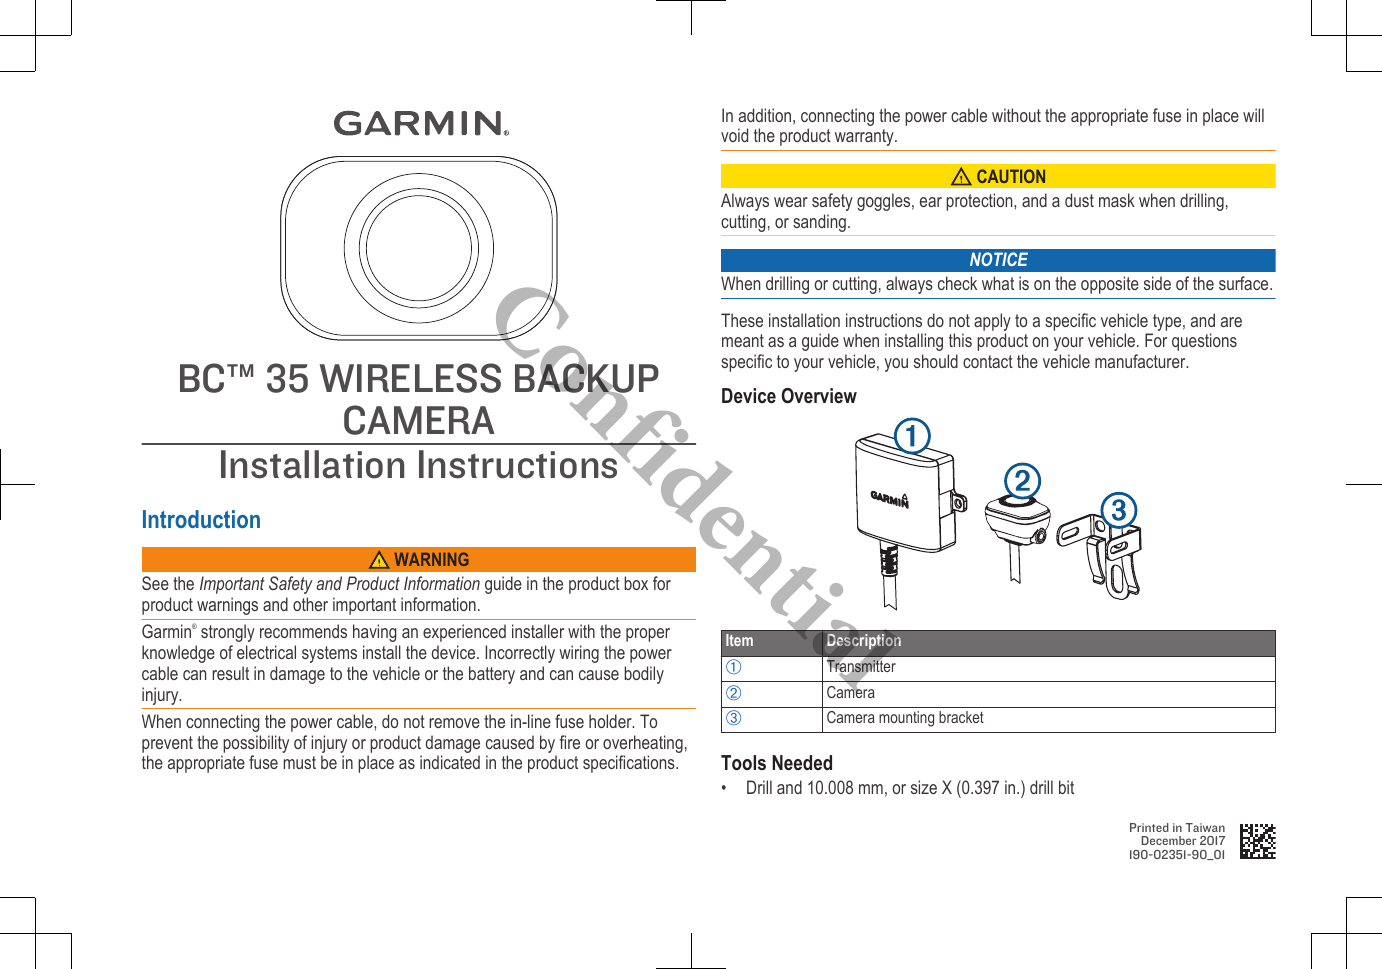 BC™ 35 WIRELESS BACKUPCAMERAInstallation InstructionsIntroduction WARNINGSee the Important Safety and Product Information guide in the product box forproduct warnings and other important information.Garmin® strongly recommends having an experienced installer with the properknowledge of electrical systems install the device. Incorrectly wiring the powercable can result in damage to the vehicle or the battery and can cause bodilyinjury.When connecting the power cable, do not remove the in-line fuse holder. Toprevent the possibility of injury or product damage caused by fire or overheating,the appropriate fuse must be in place as indicated in the product specifications.In addition, connecting the power cable without the appropriate fuse in place willvoid the product warranty. CAUTIONAlways wear safety goggles, ear protection, and a dust mask when drilling,cutting, or sanding.NOTICEWhen drilling or cutting, always check what is on the opposite side of the surface.These installation instructions do not apply to a specific vehicle type, and aremeant as a guide when installing this product on your vehicle. For questionsspecific to your vehicle, you should contact the vehicle manufacturer.Device OverviewItem DescriptionÀTransmitterÁCameraÂCamera mounting bracketTools Needed• Drill and 10.008 mm, or size X (0.397 in.) drill bitPrinted in TaiwanDecember 2017190-02351-90_01Confidential